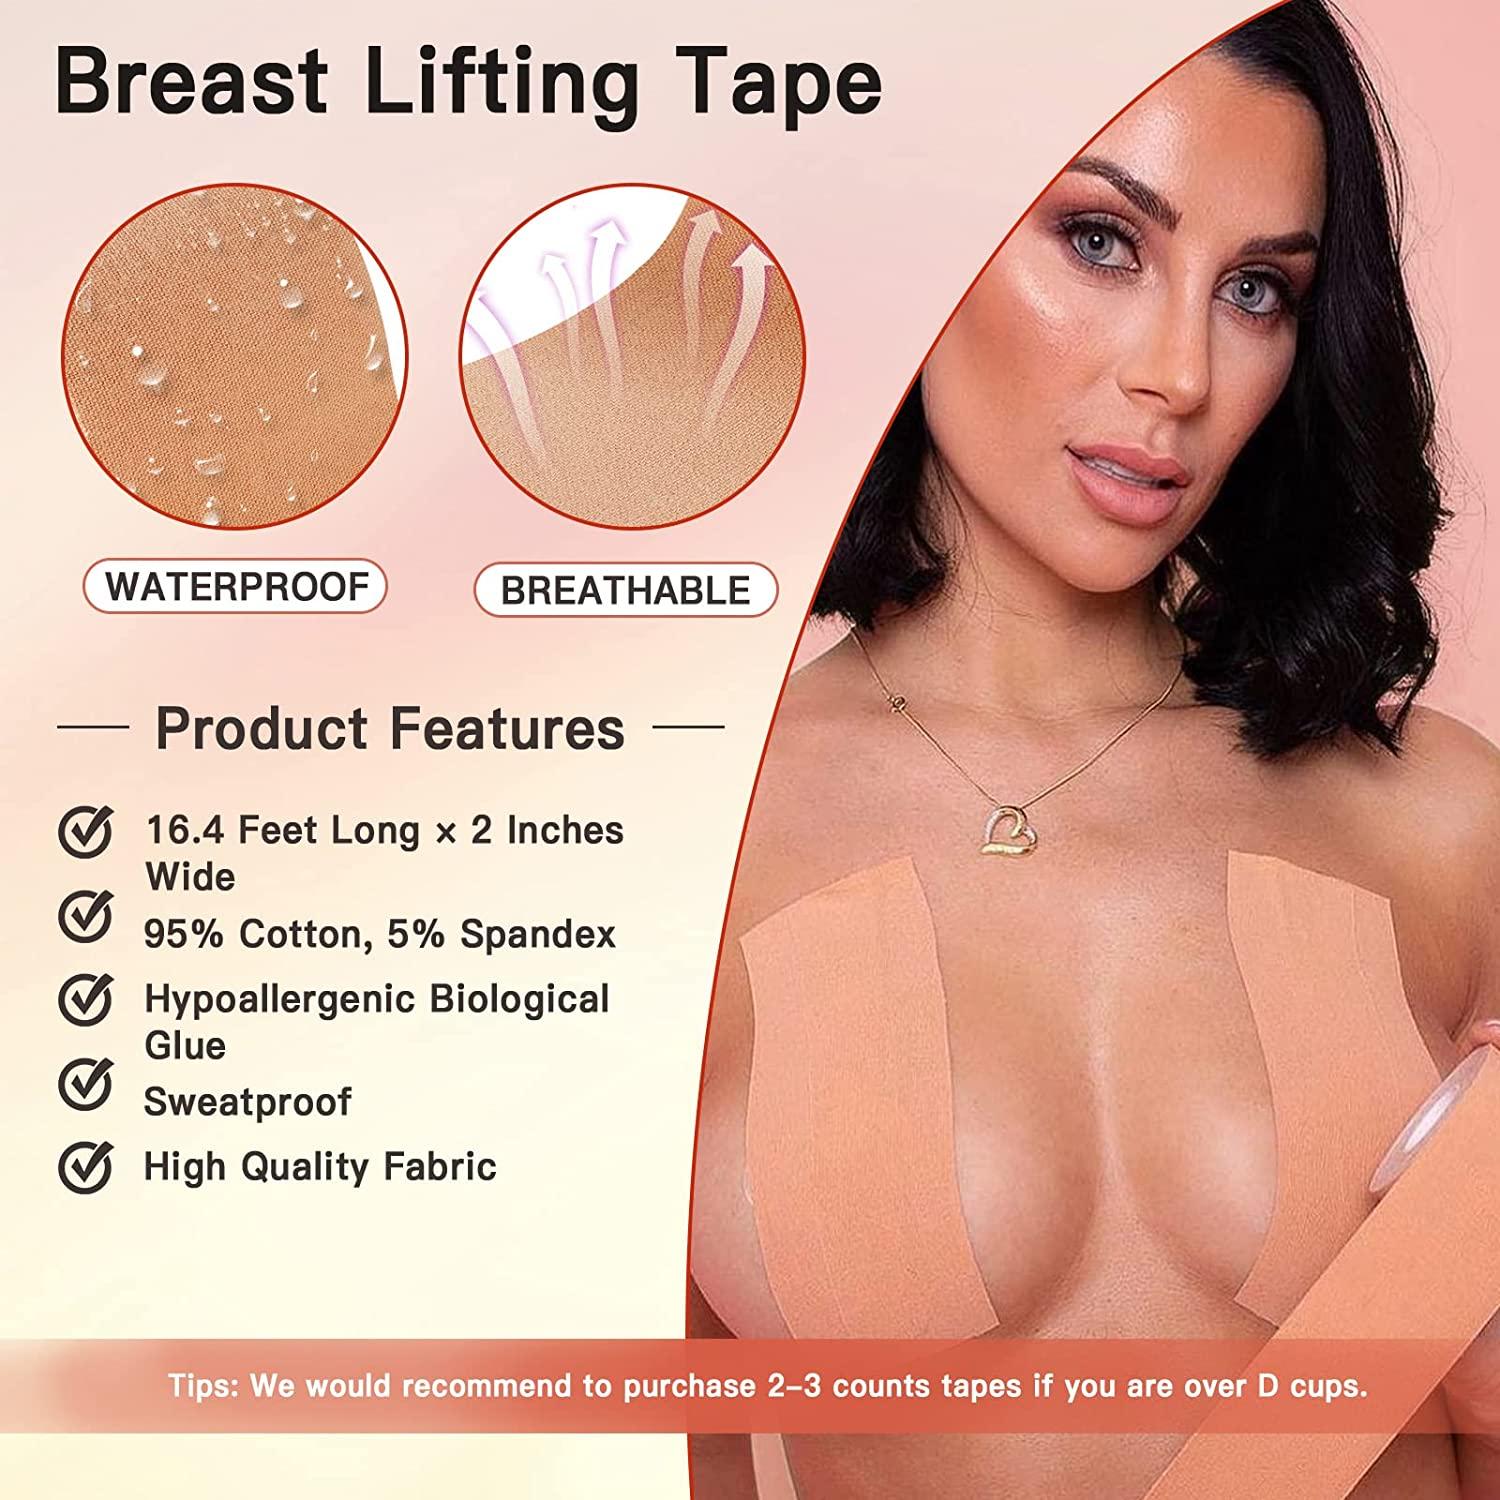 REFUN Boob Tape, Boobytape for Breast Lift with 2pcs Reusable